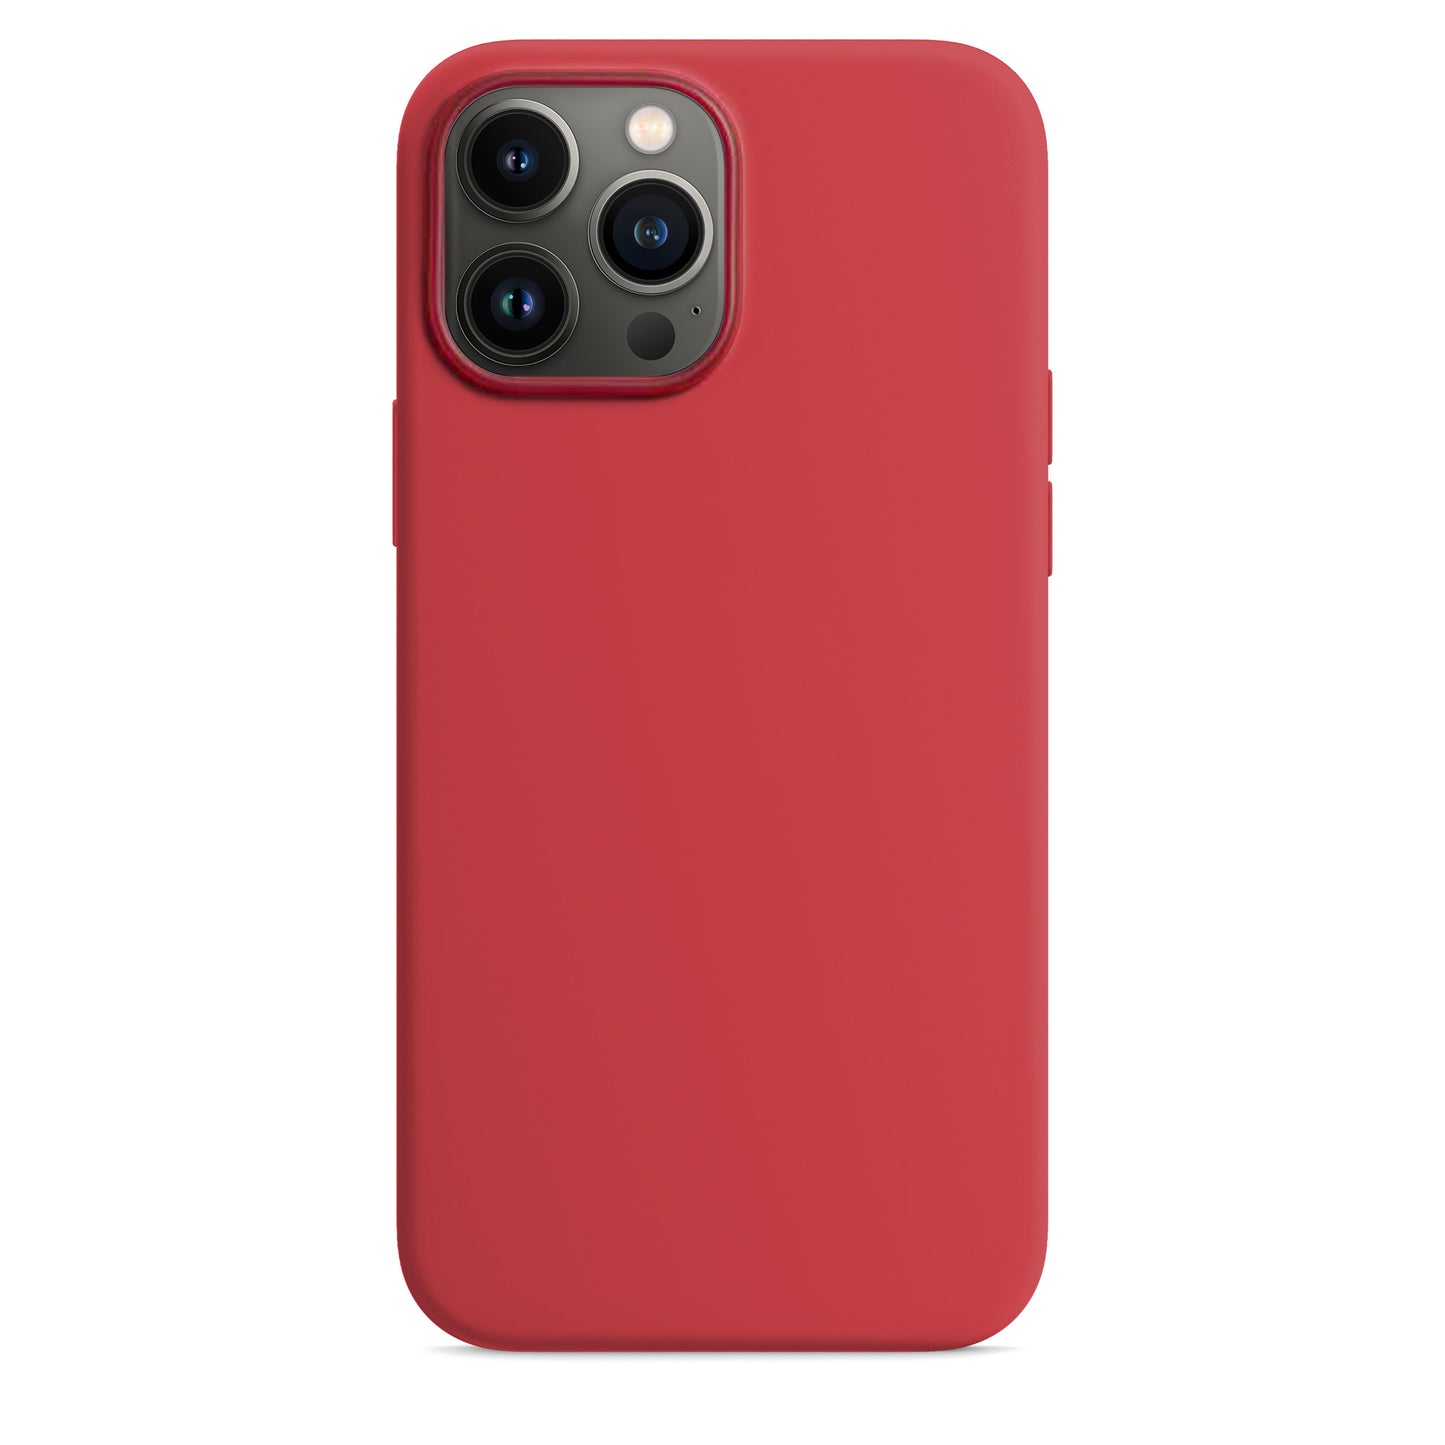 Red silicone case for iPhone